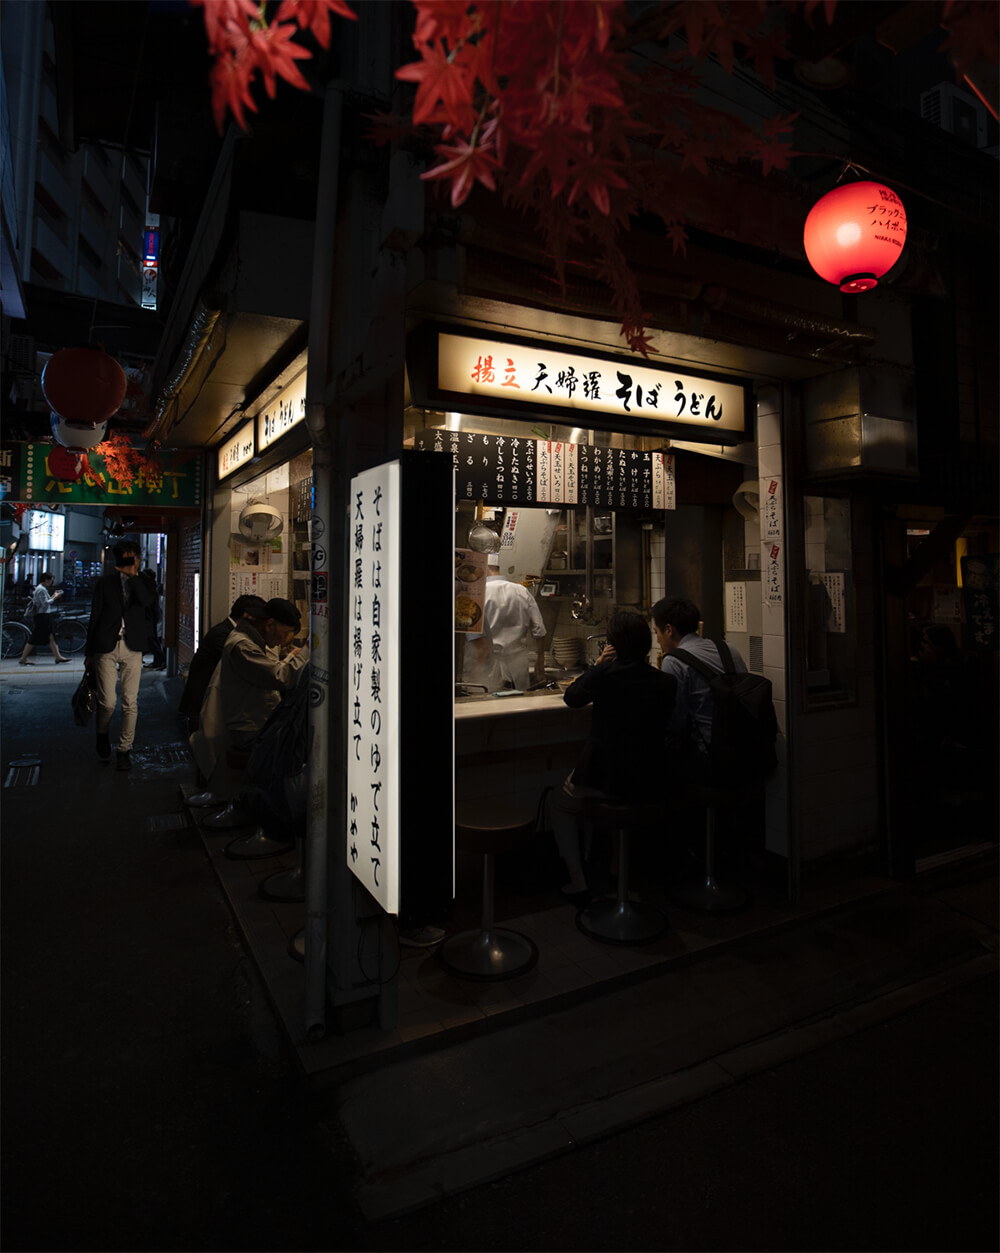 Raw low light image of night store by Julian Lallo